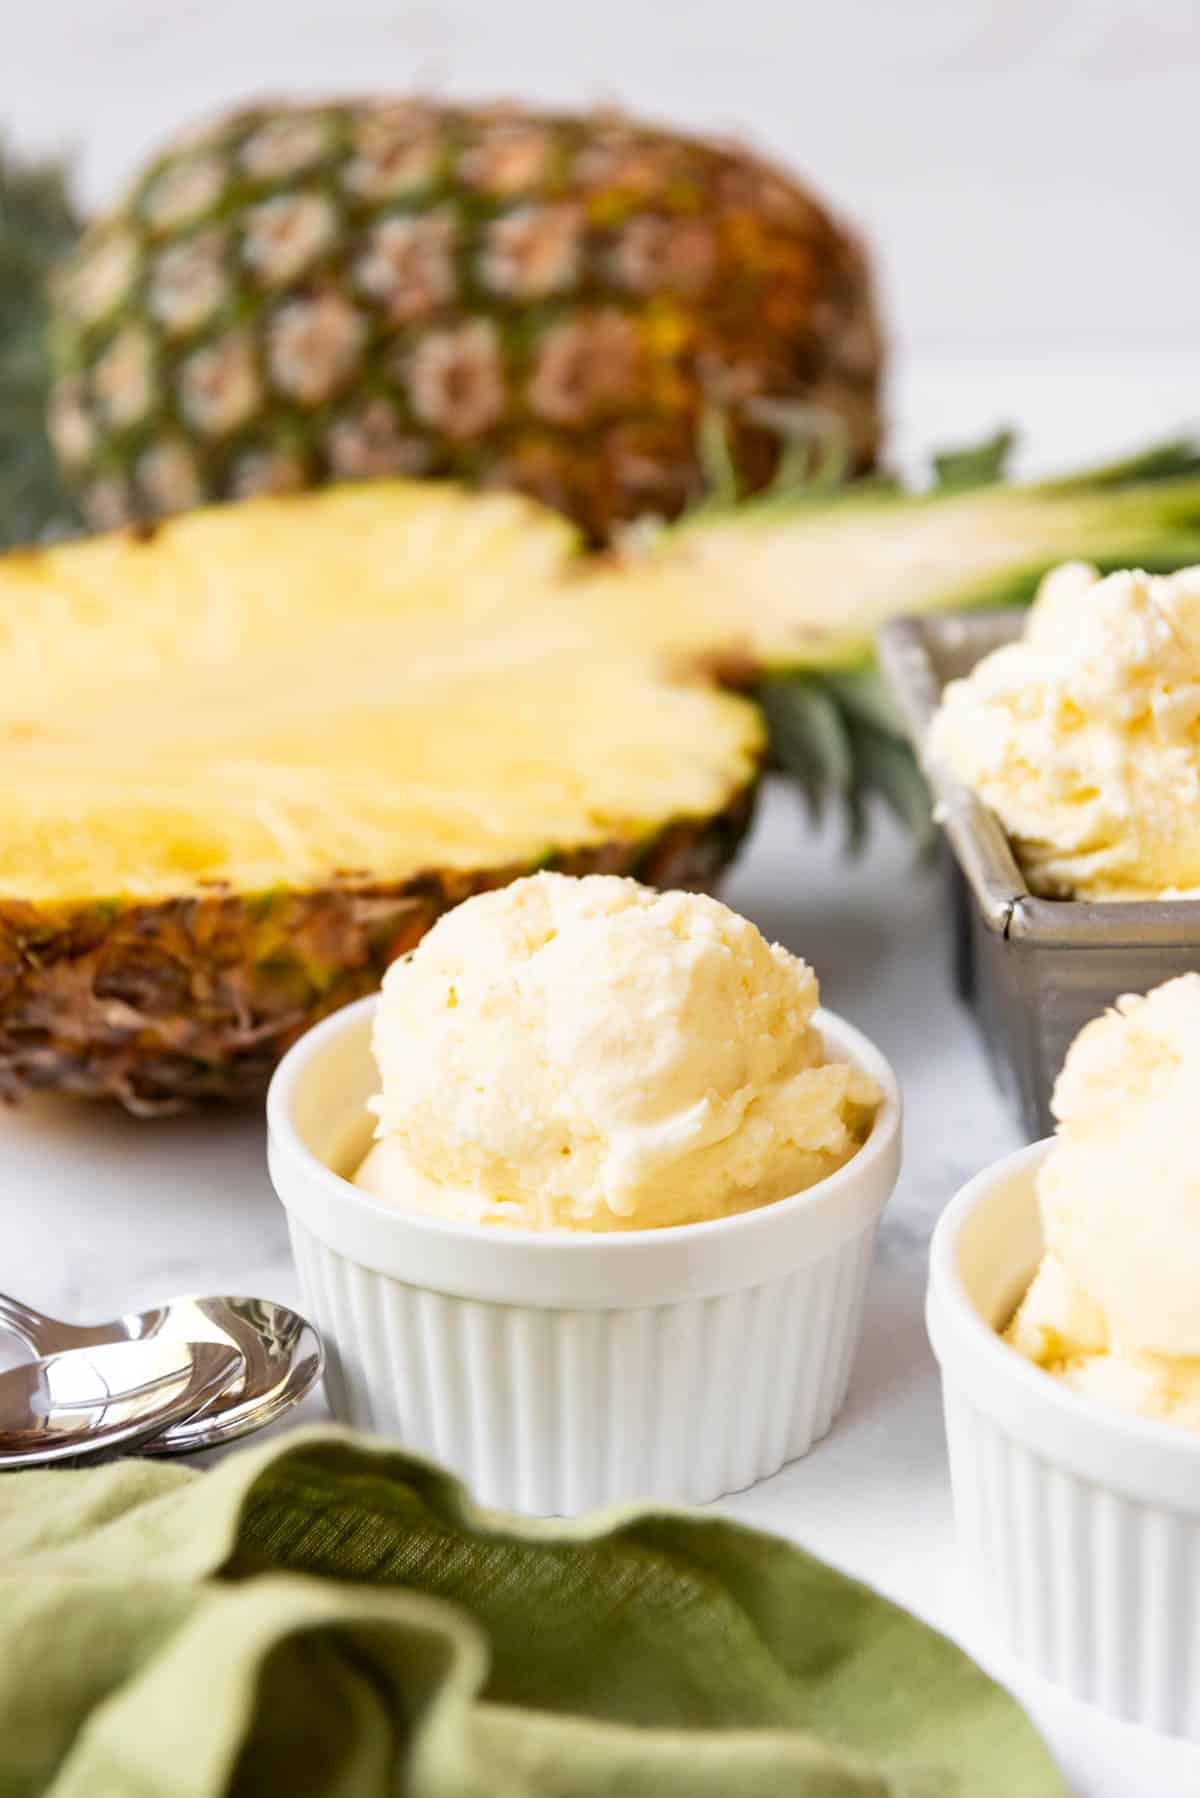 Bowls of pineapple ice cream in front of whole pineapples.